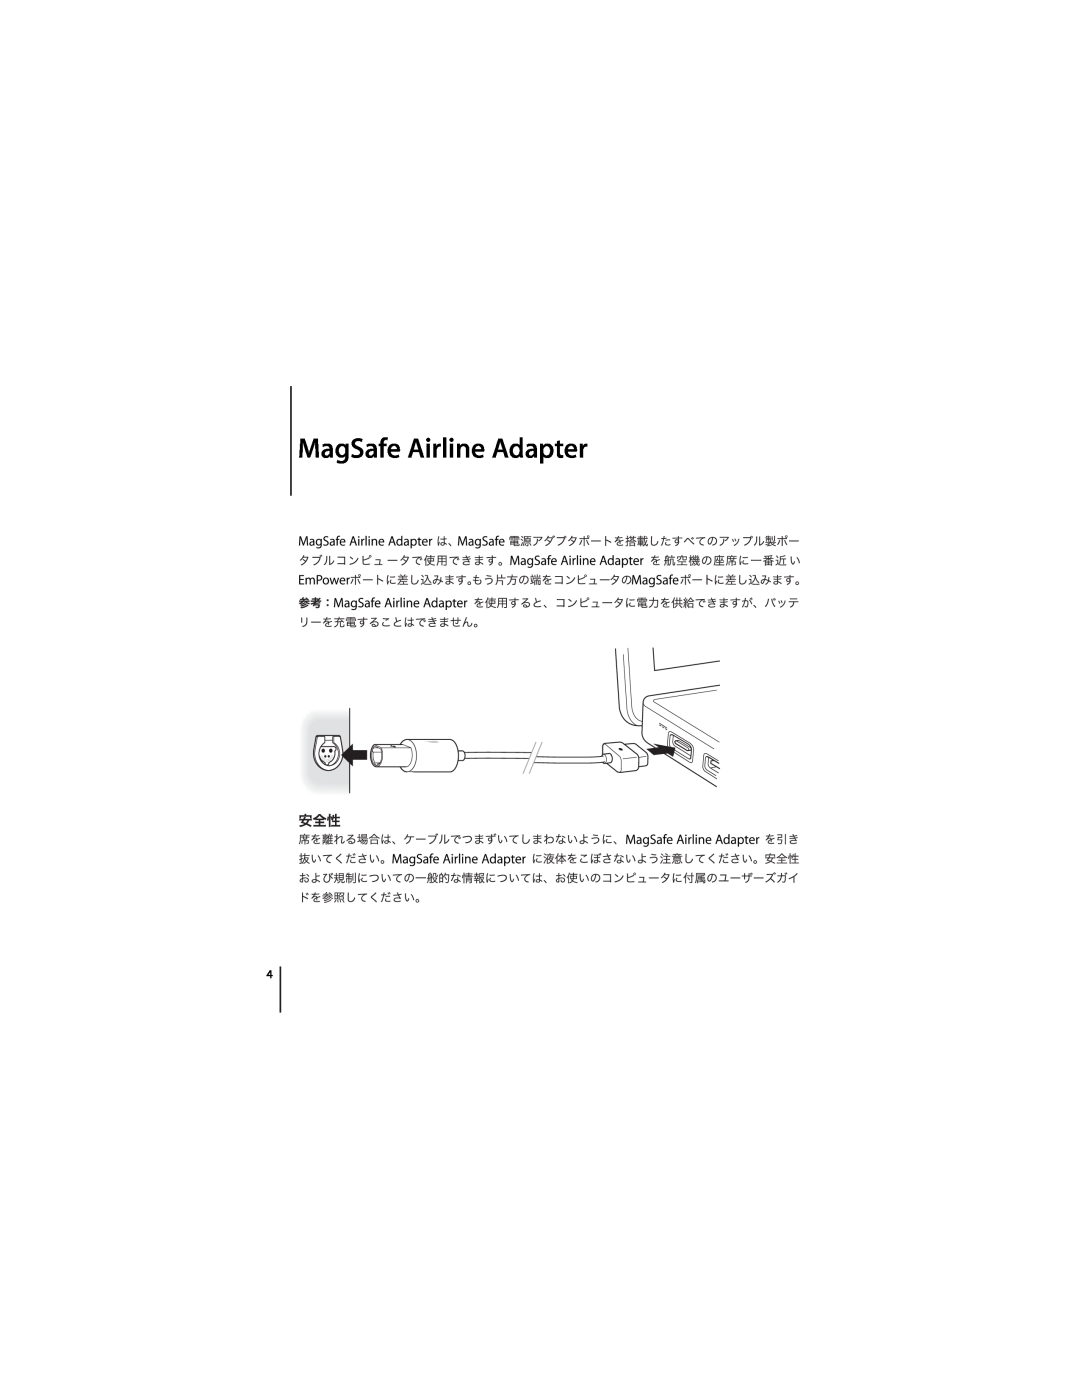 Apple manual MagSafe Airline Adapter 